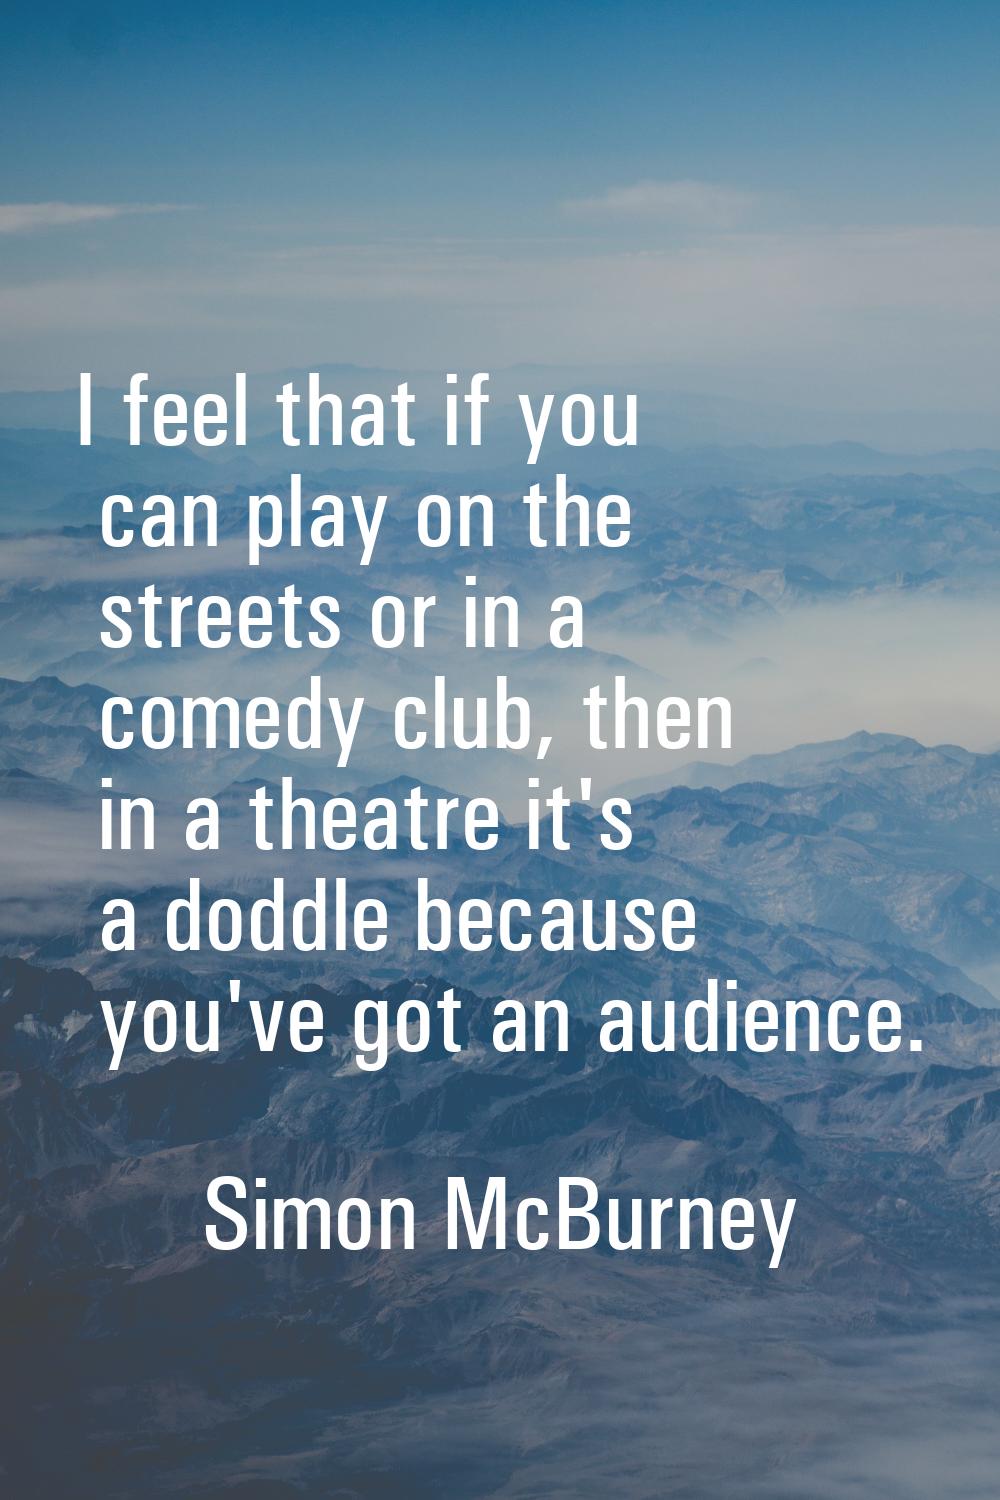 I feel that if you can play on the streets or in a comedy club, then in a theatre it's a doddle bec